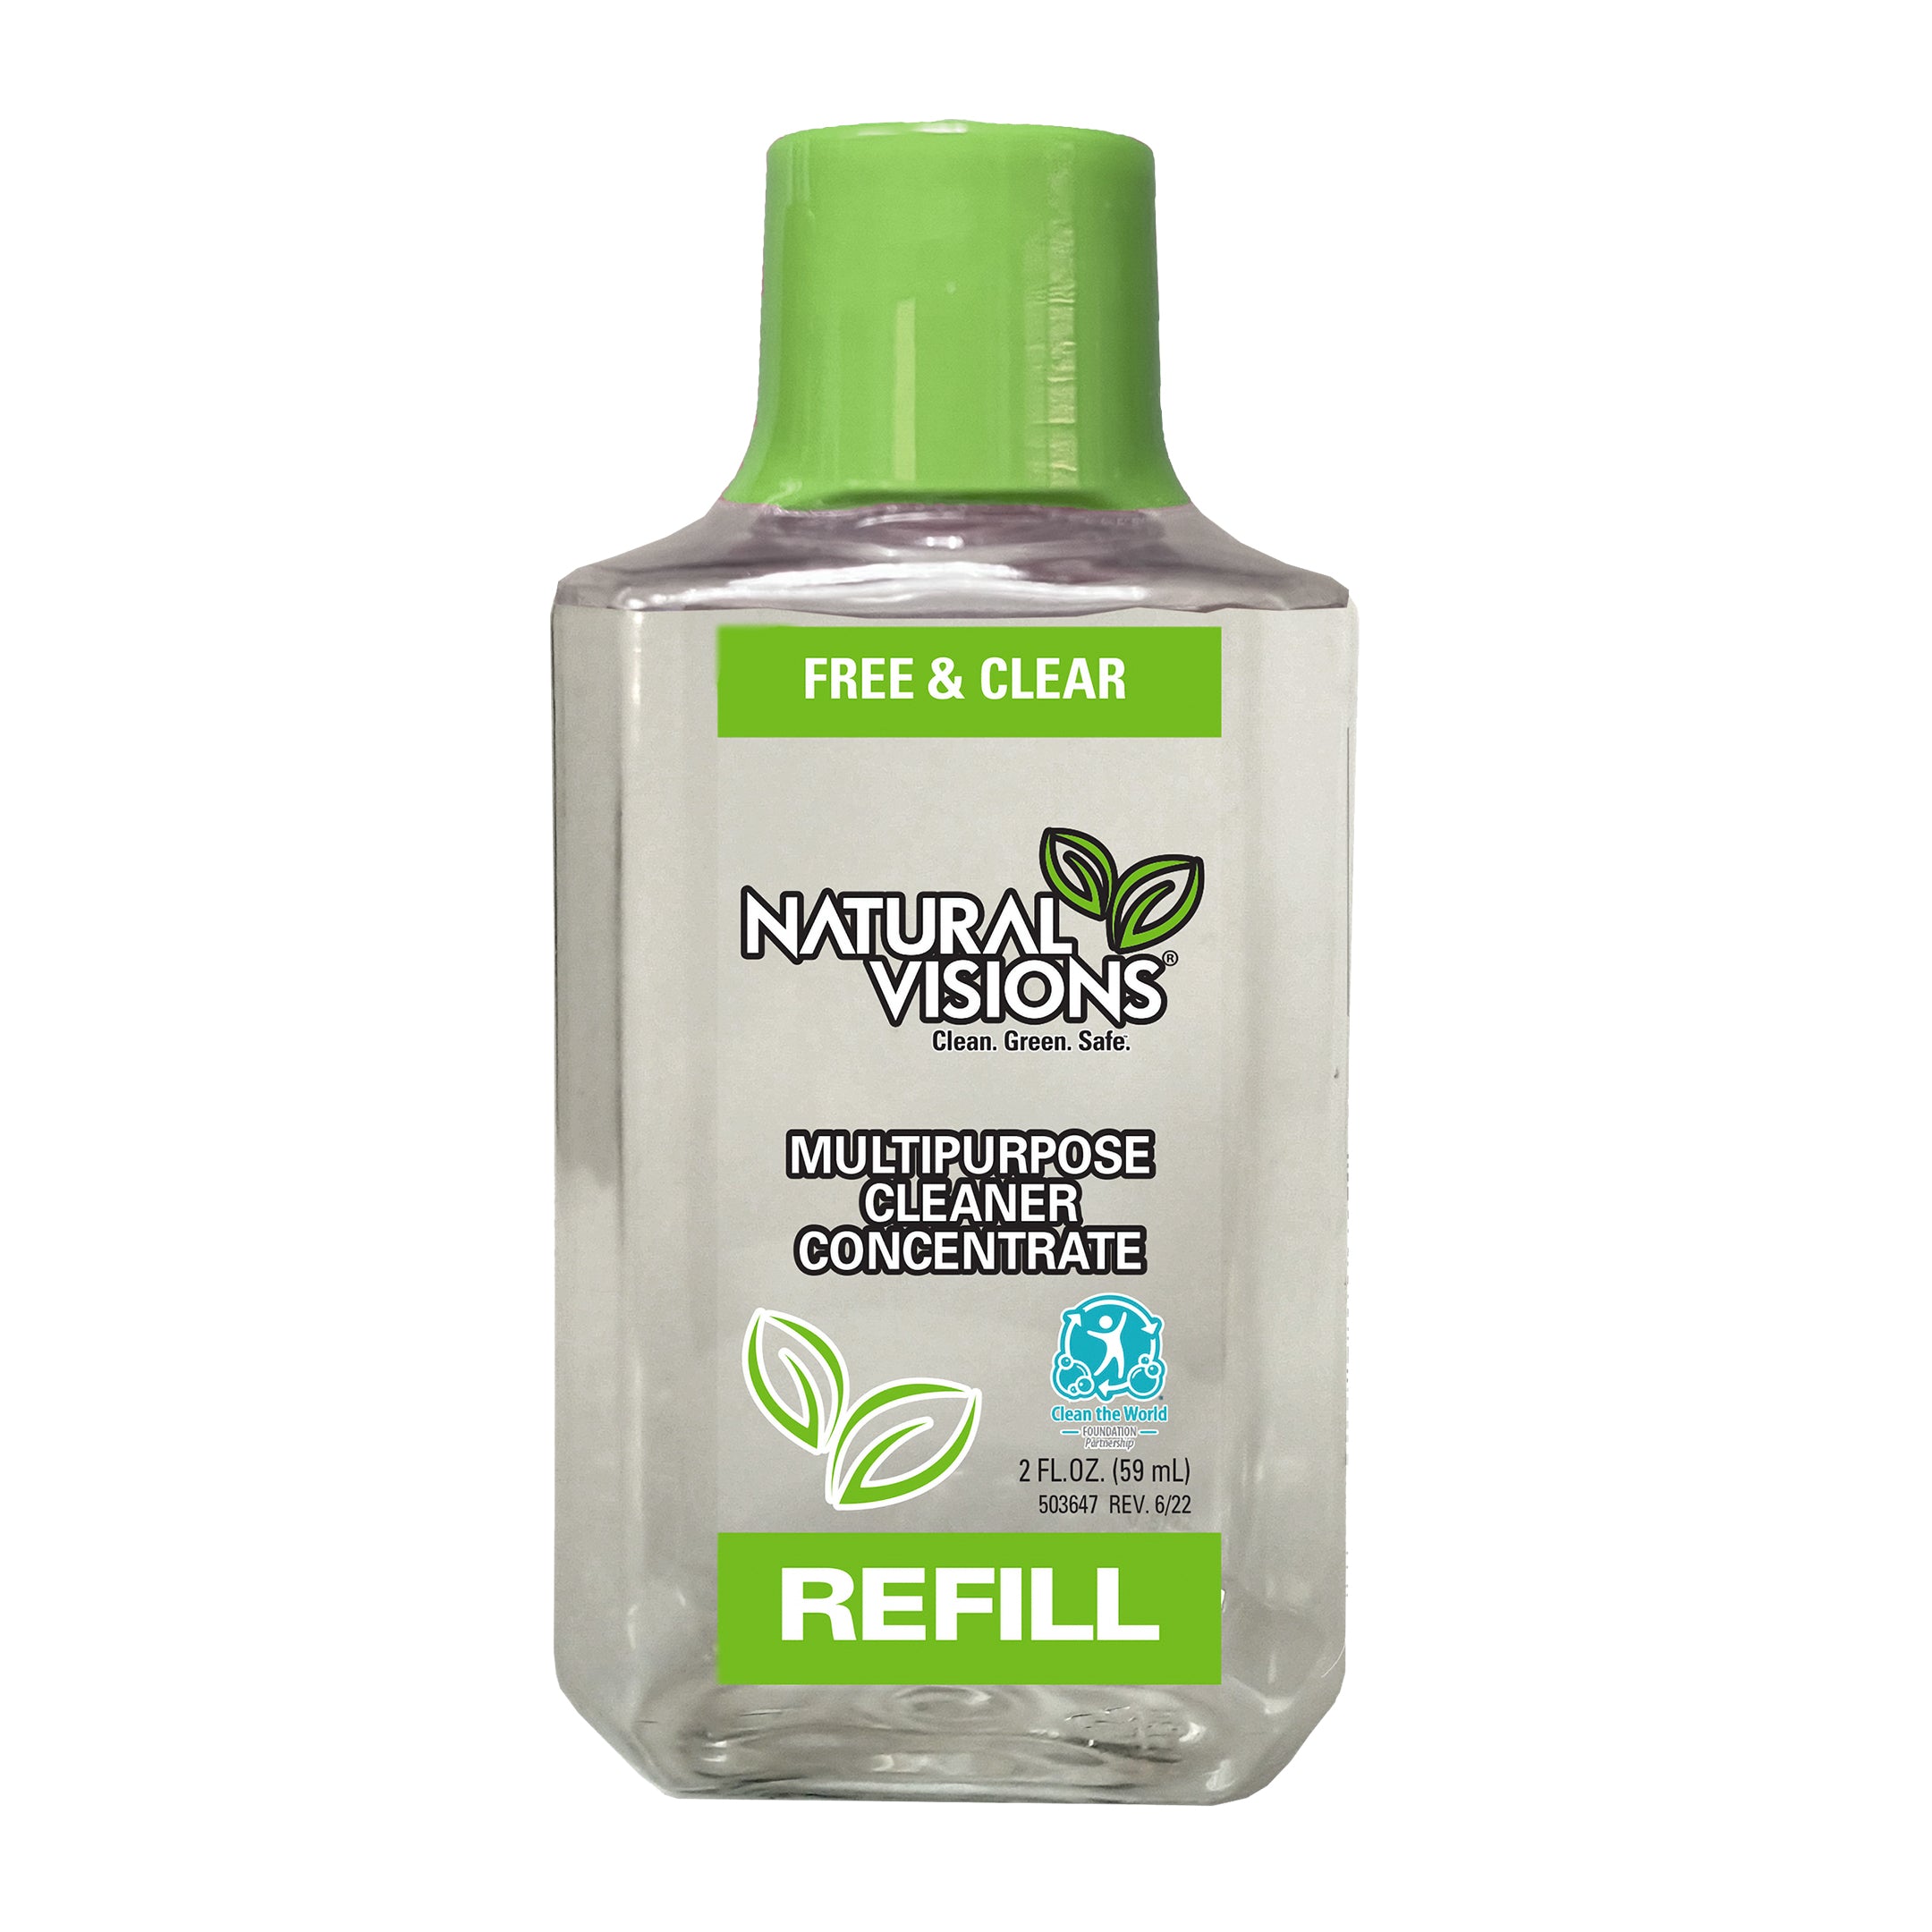 Natural Visions Free & Clear Multipurpose Cleaner Concentrate - 2oz/12pk